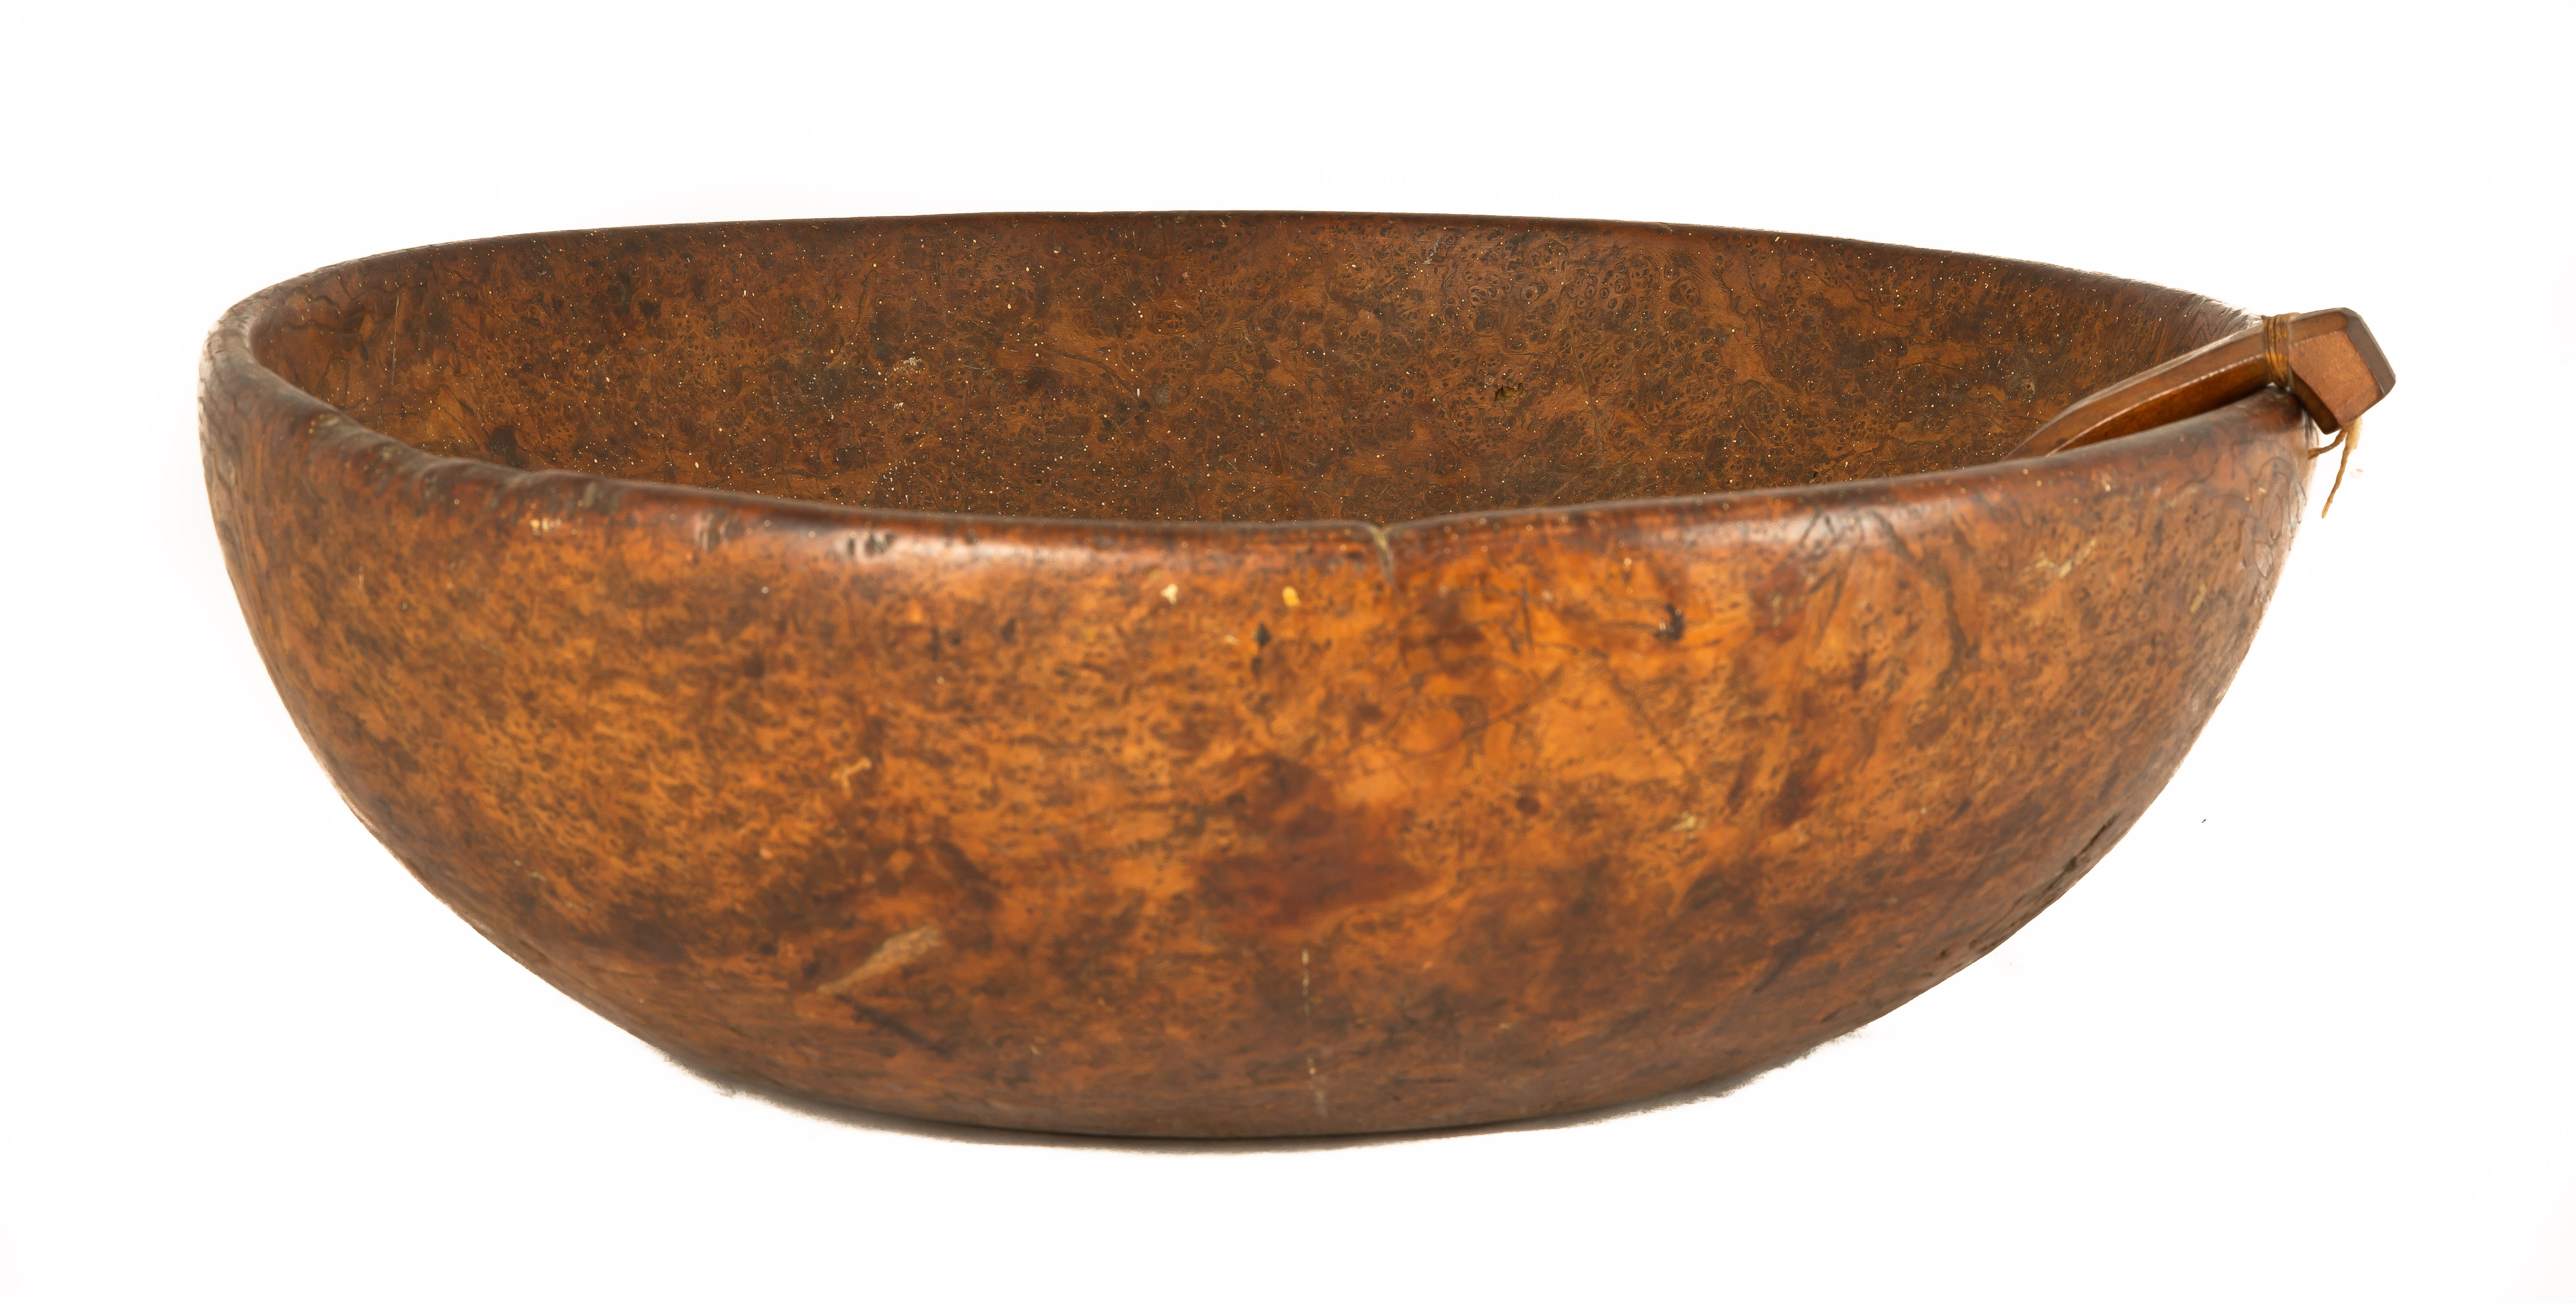 BURL BOWL WITH BUTTER LADLES 19th